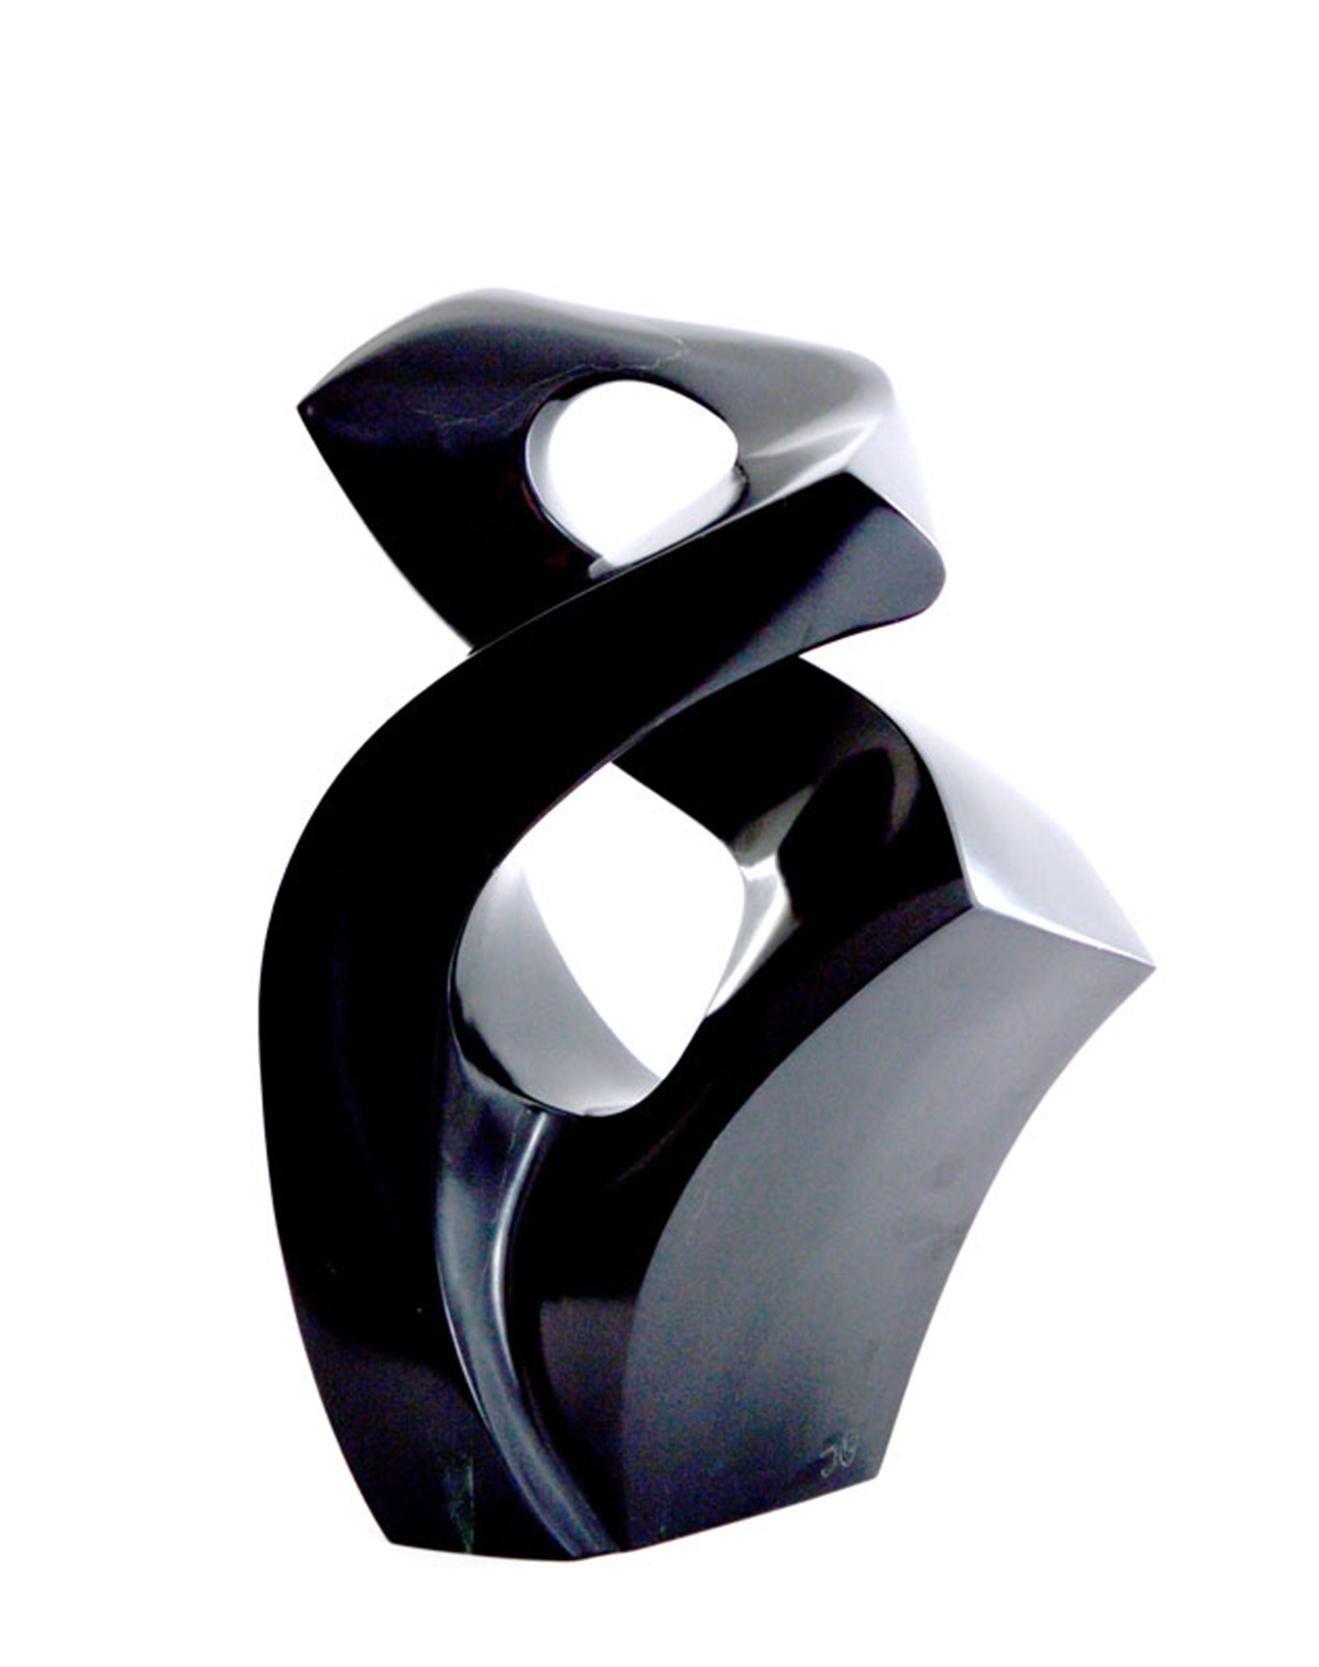 Embrace - small, smooth, polished, abstract, black marble sculpture - Contemporary Sculpture by Jeremy Guy